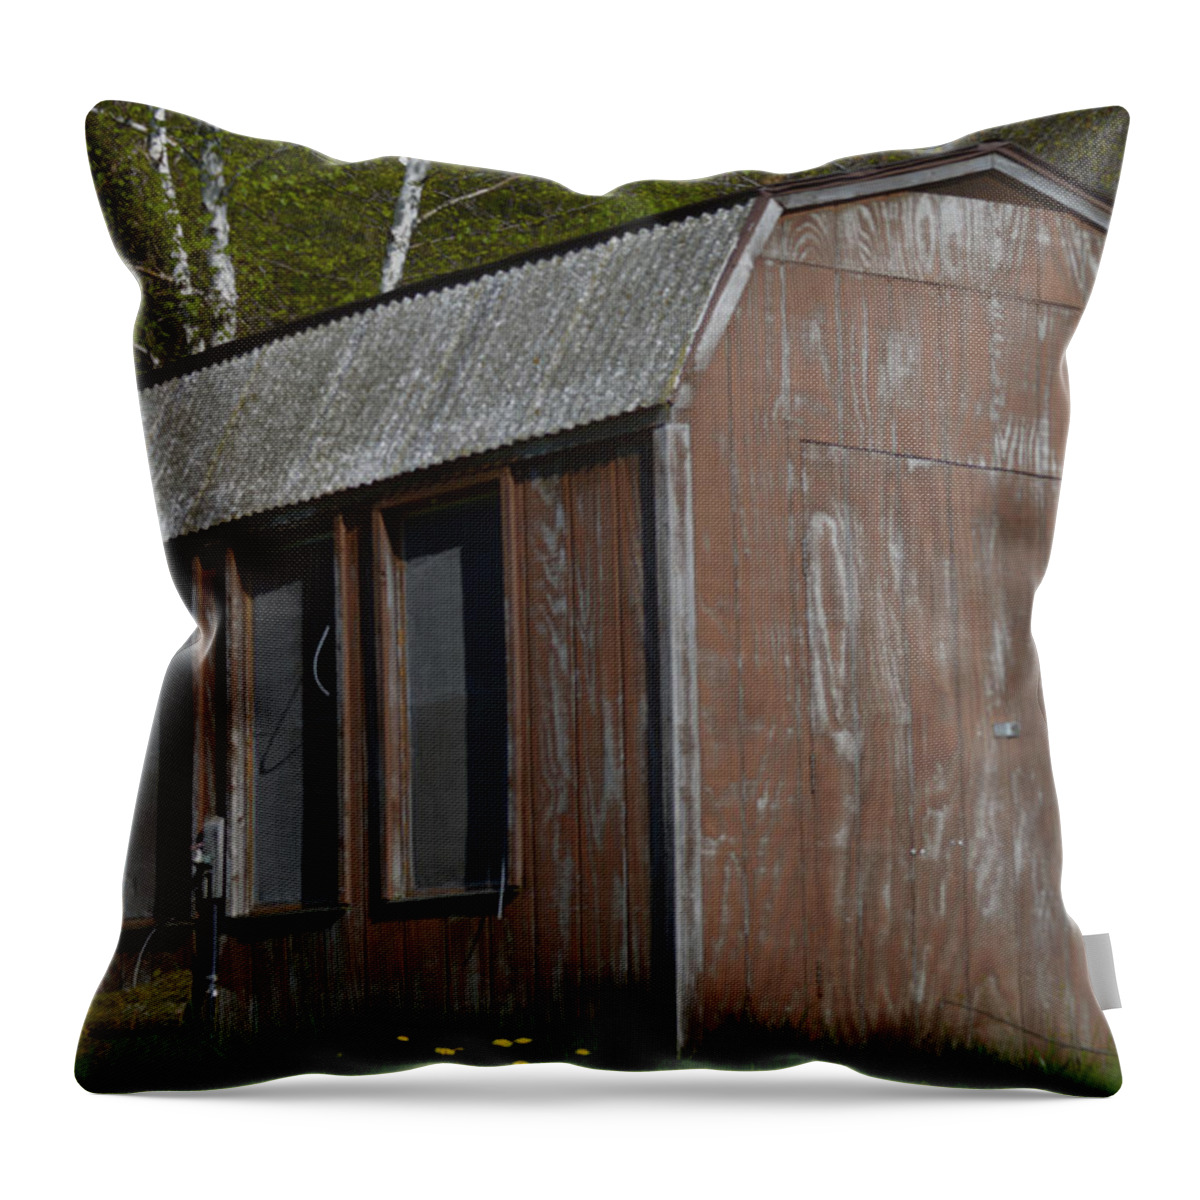  Throw Pillow featuring the photograph The Shed by Michelle Hoffmann